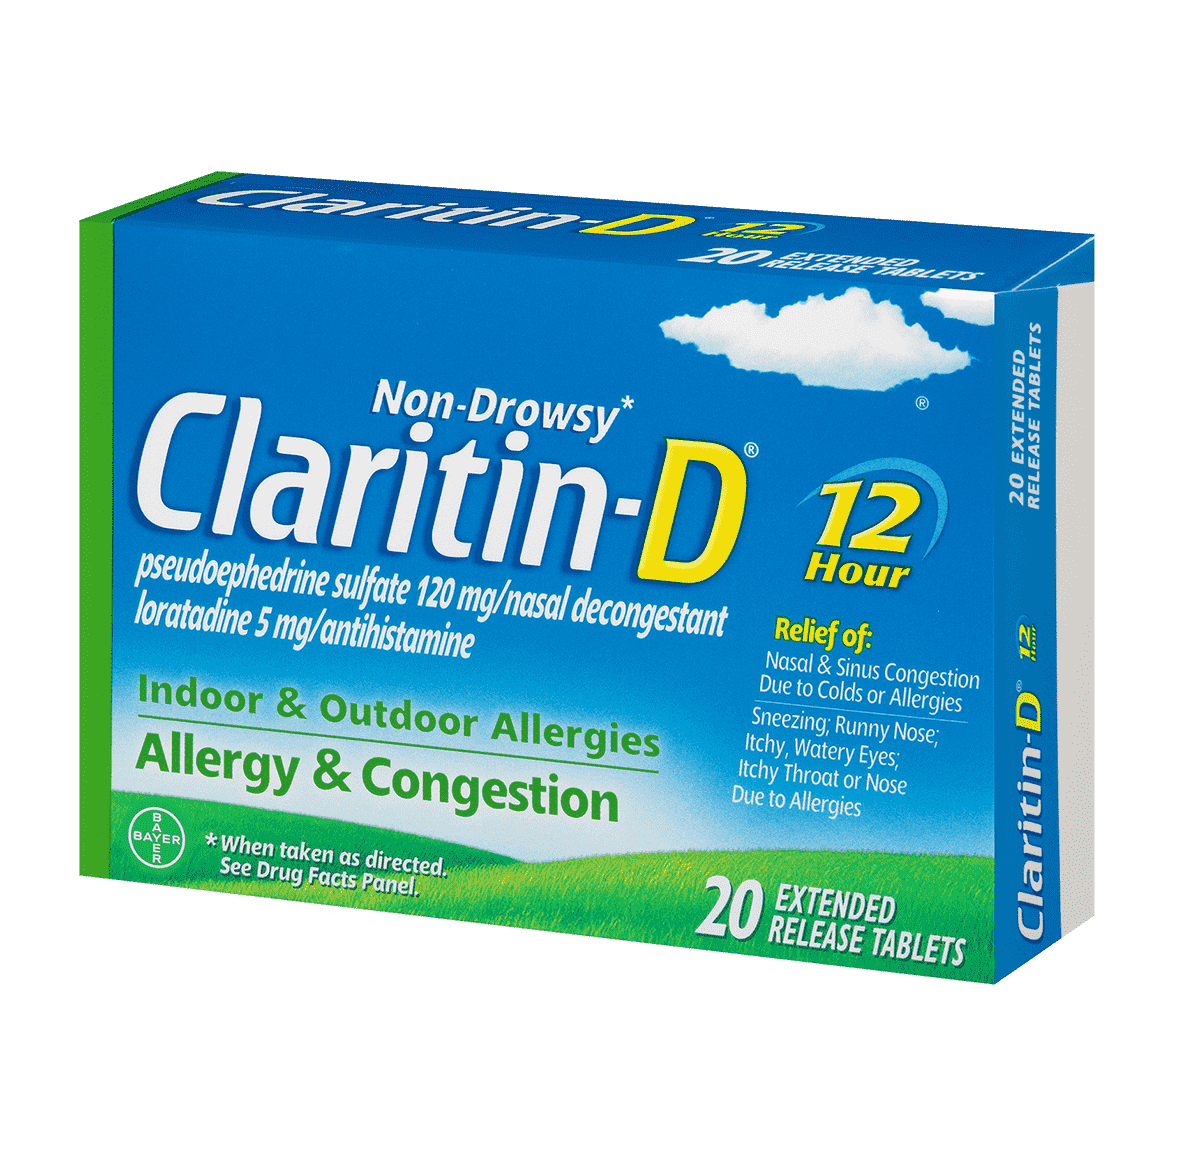 angled view of Claritin-D 12 hour tablets package